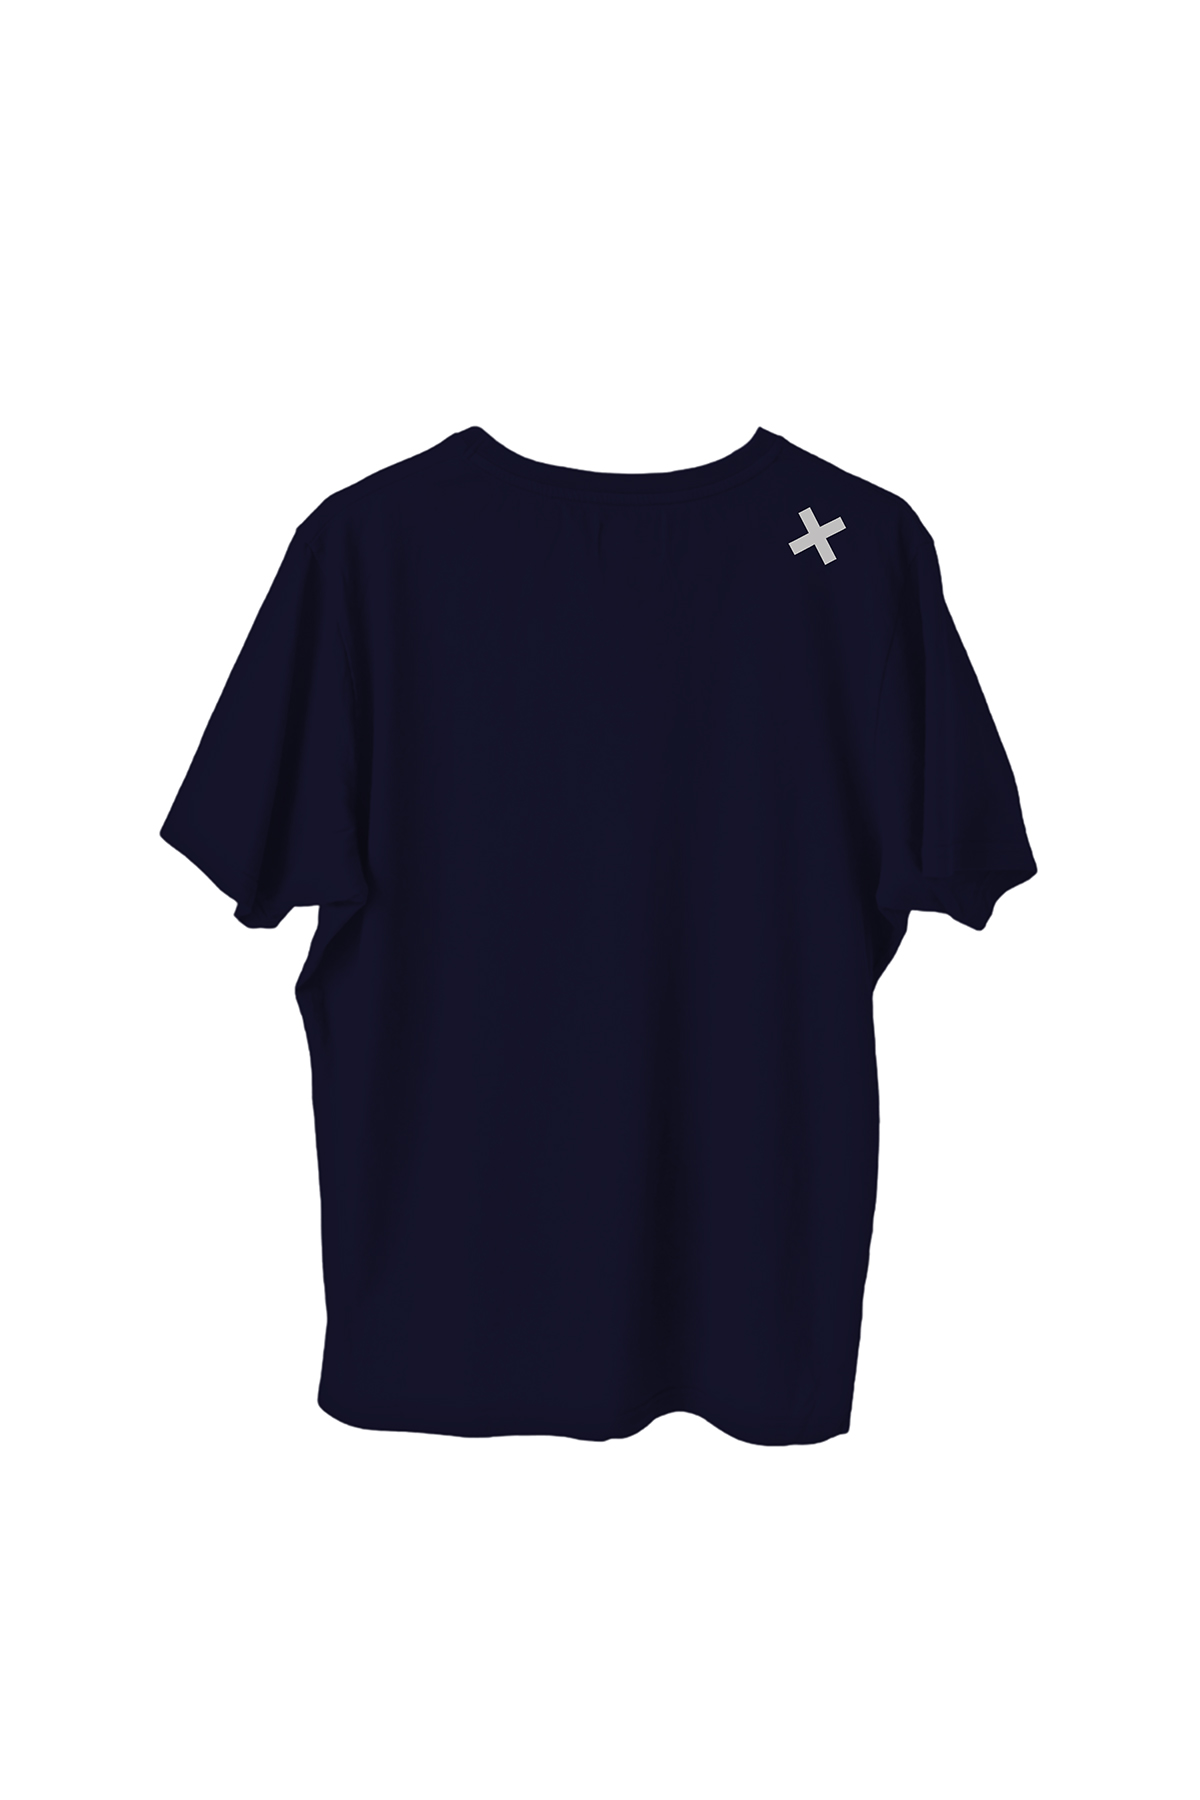 Time-Out-X-Signature-Athleisure-Logo-T-Shirt—Navy-Blue—Back